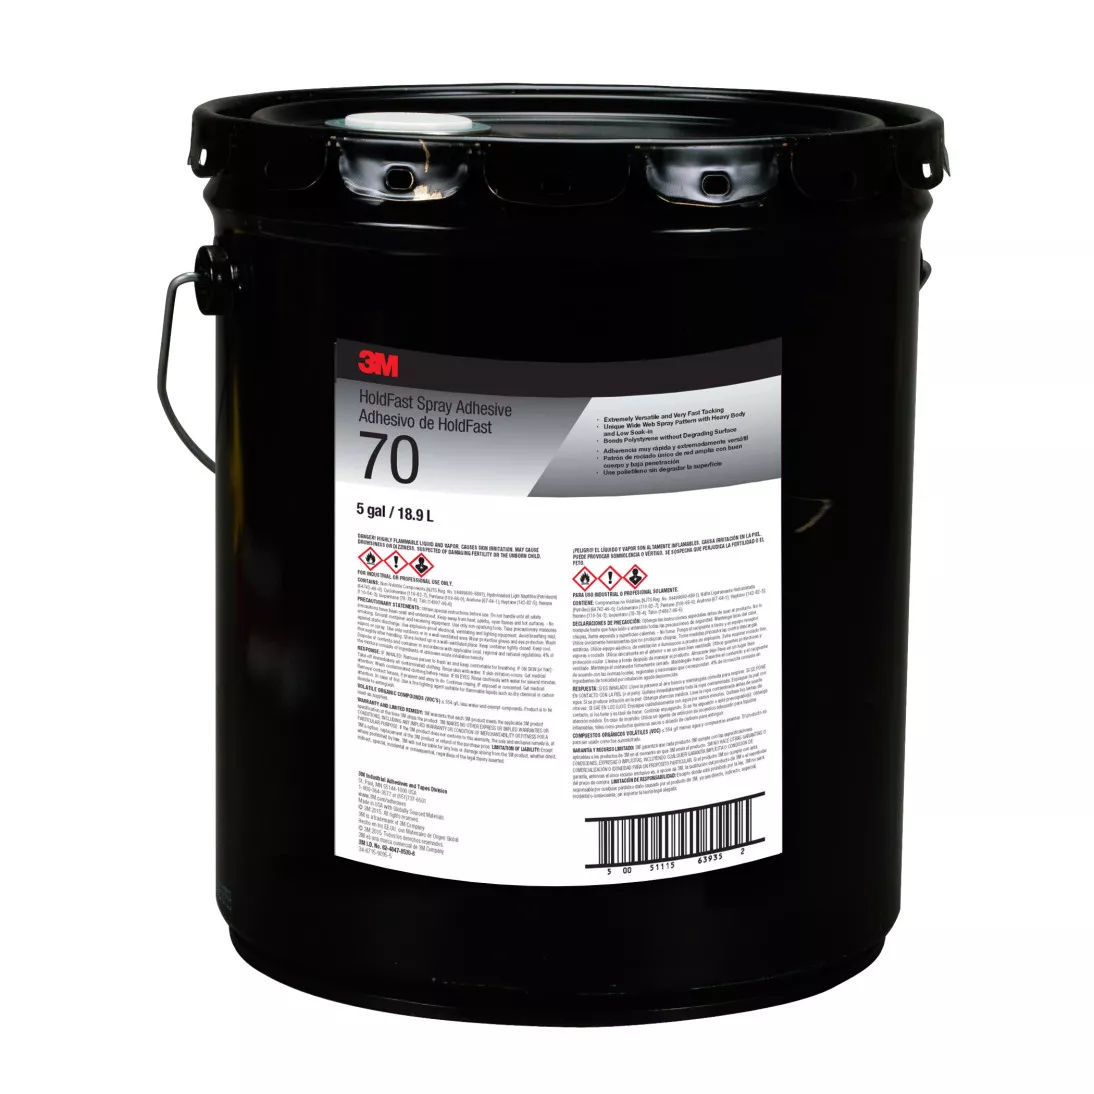 3M™ HoldFast 70 Adhesive, Clear, 5 Gallon Drum (Pail)